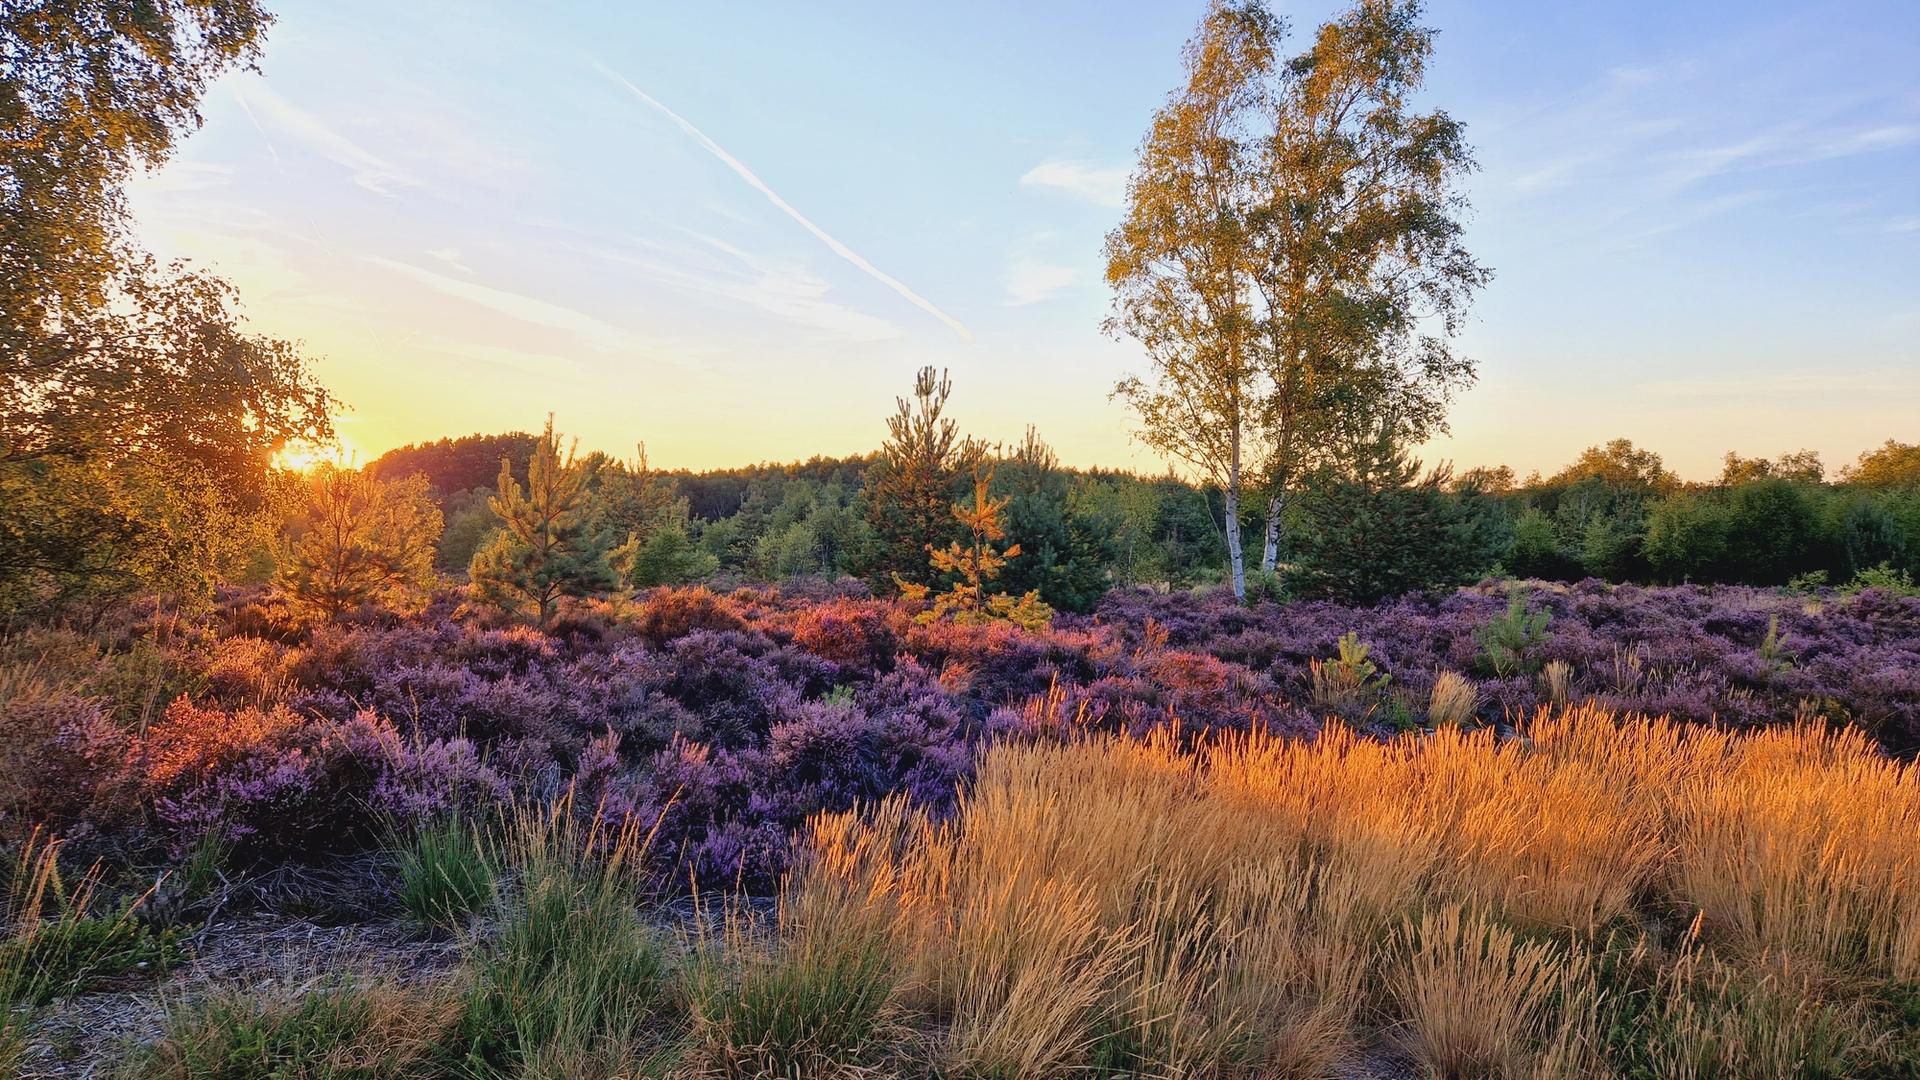 View of a natural heathland at sunset